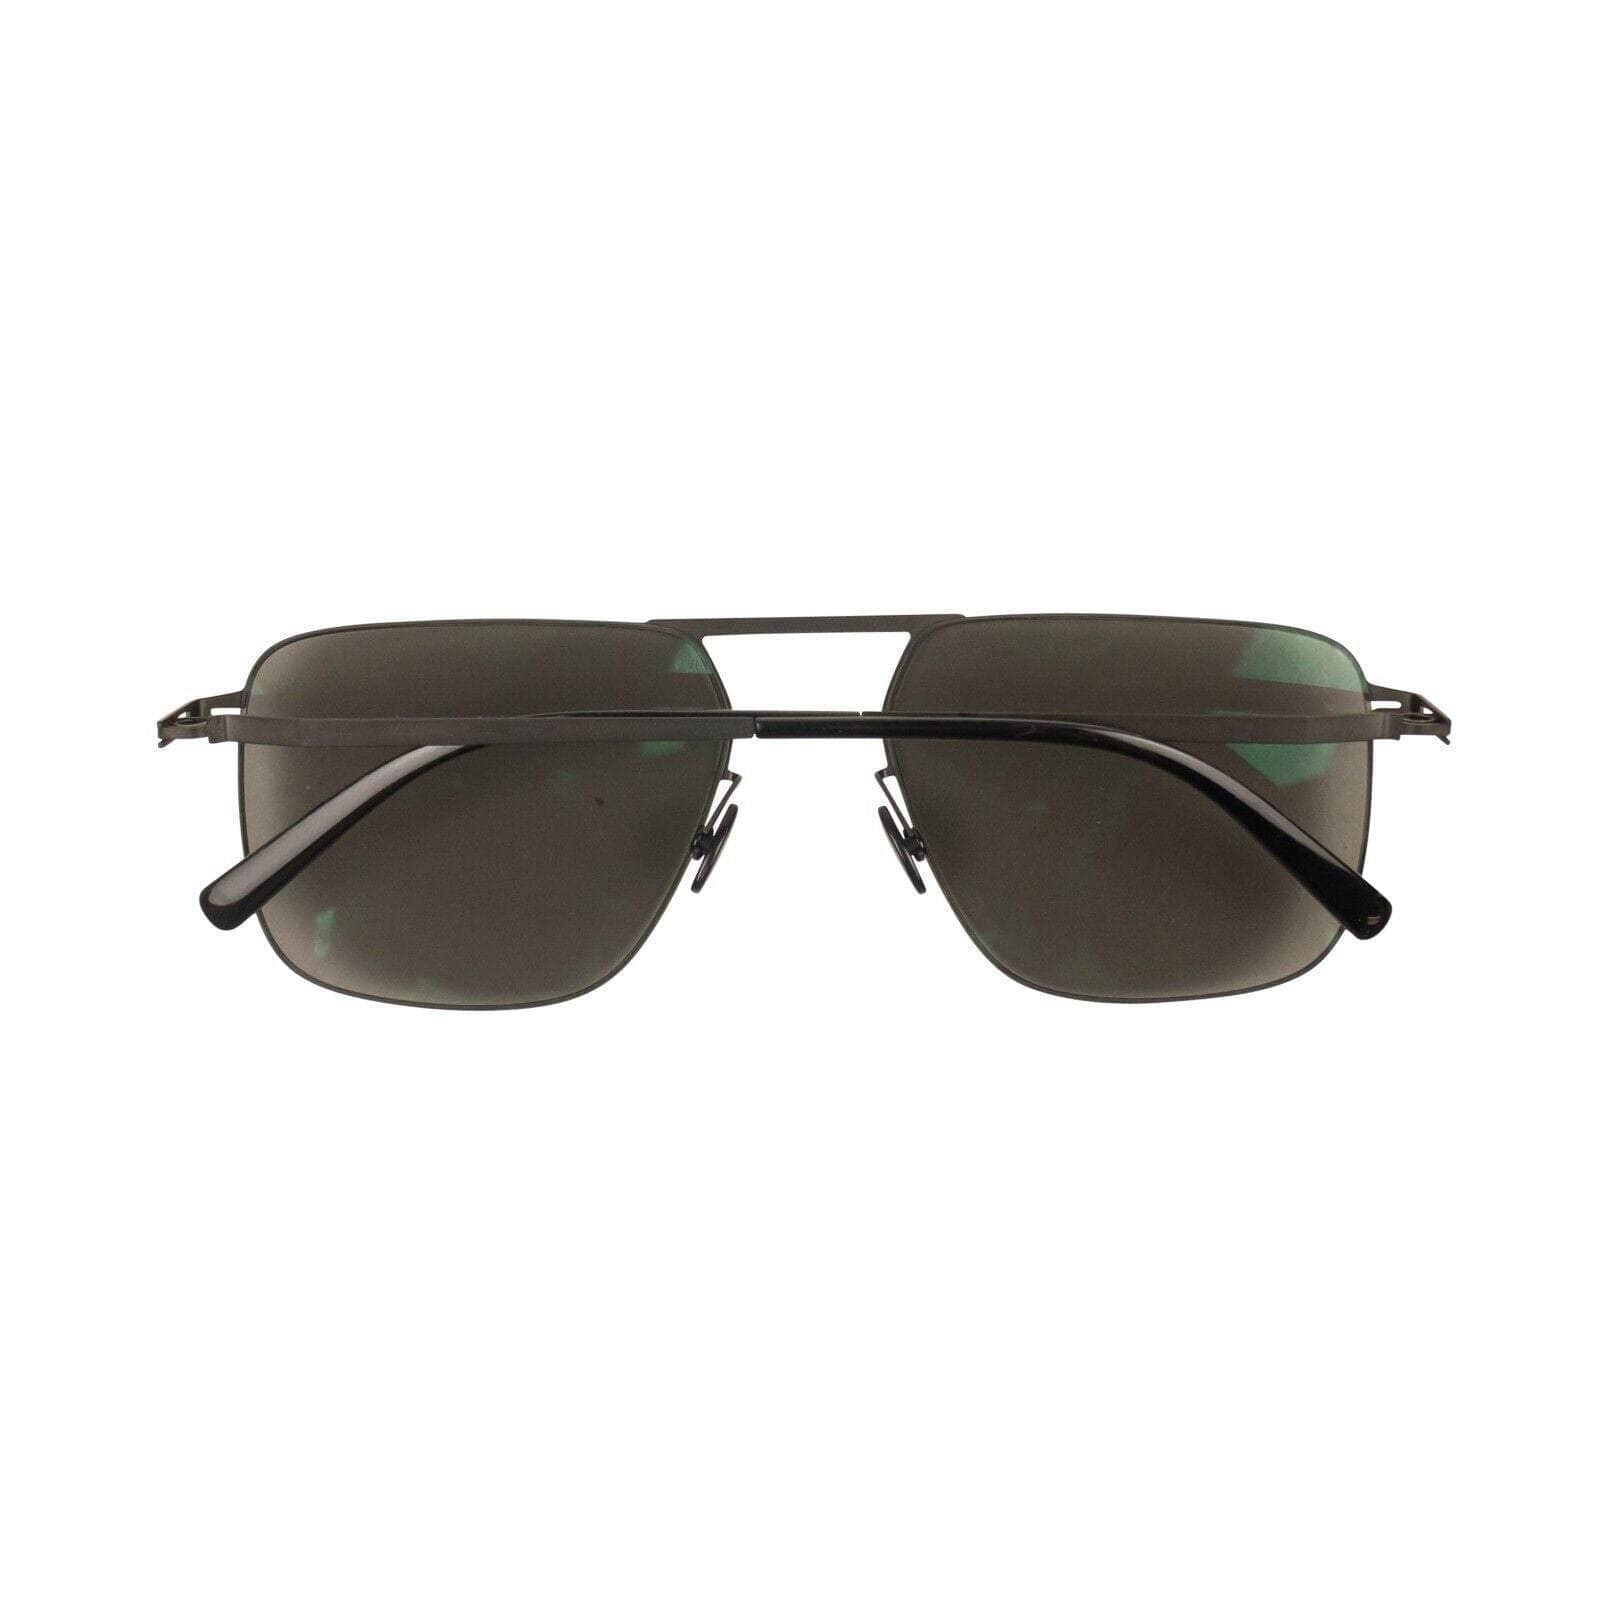 Reine Olga 250-500, channelenable-all, chicmi, couponcollection, gender-mens, gender-womens, main-accessories, mens-shoes, reine-olga, size-os, unisex-eyewear OS Black Olga Masao Square Wire Sunglasses 95-ROL-3001/OS 95-ROL-3001/OS